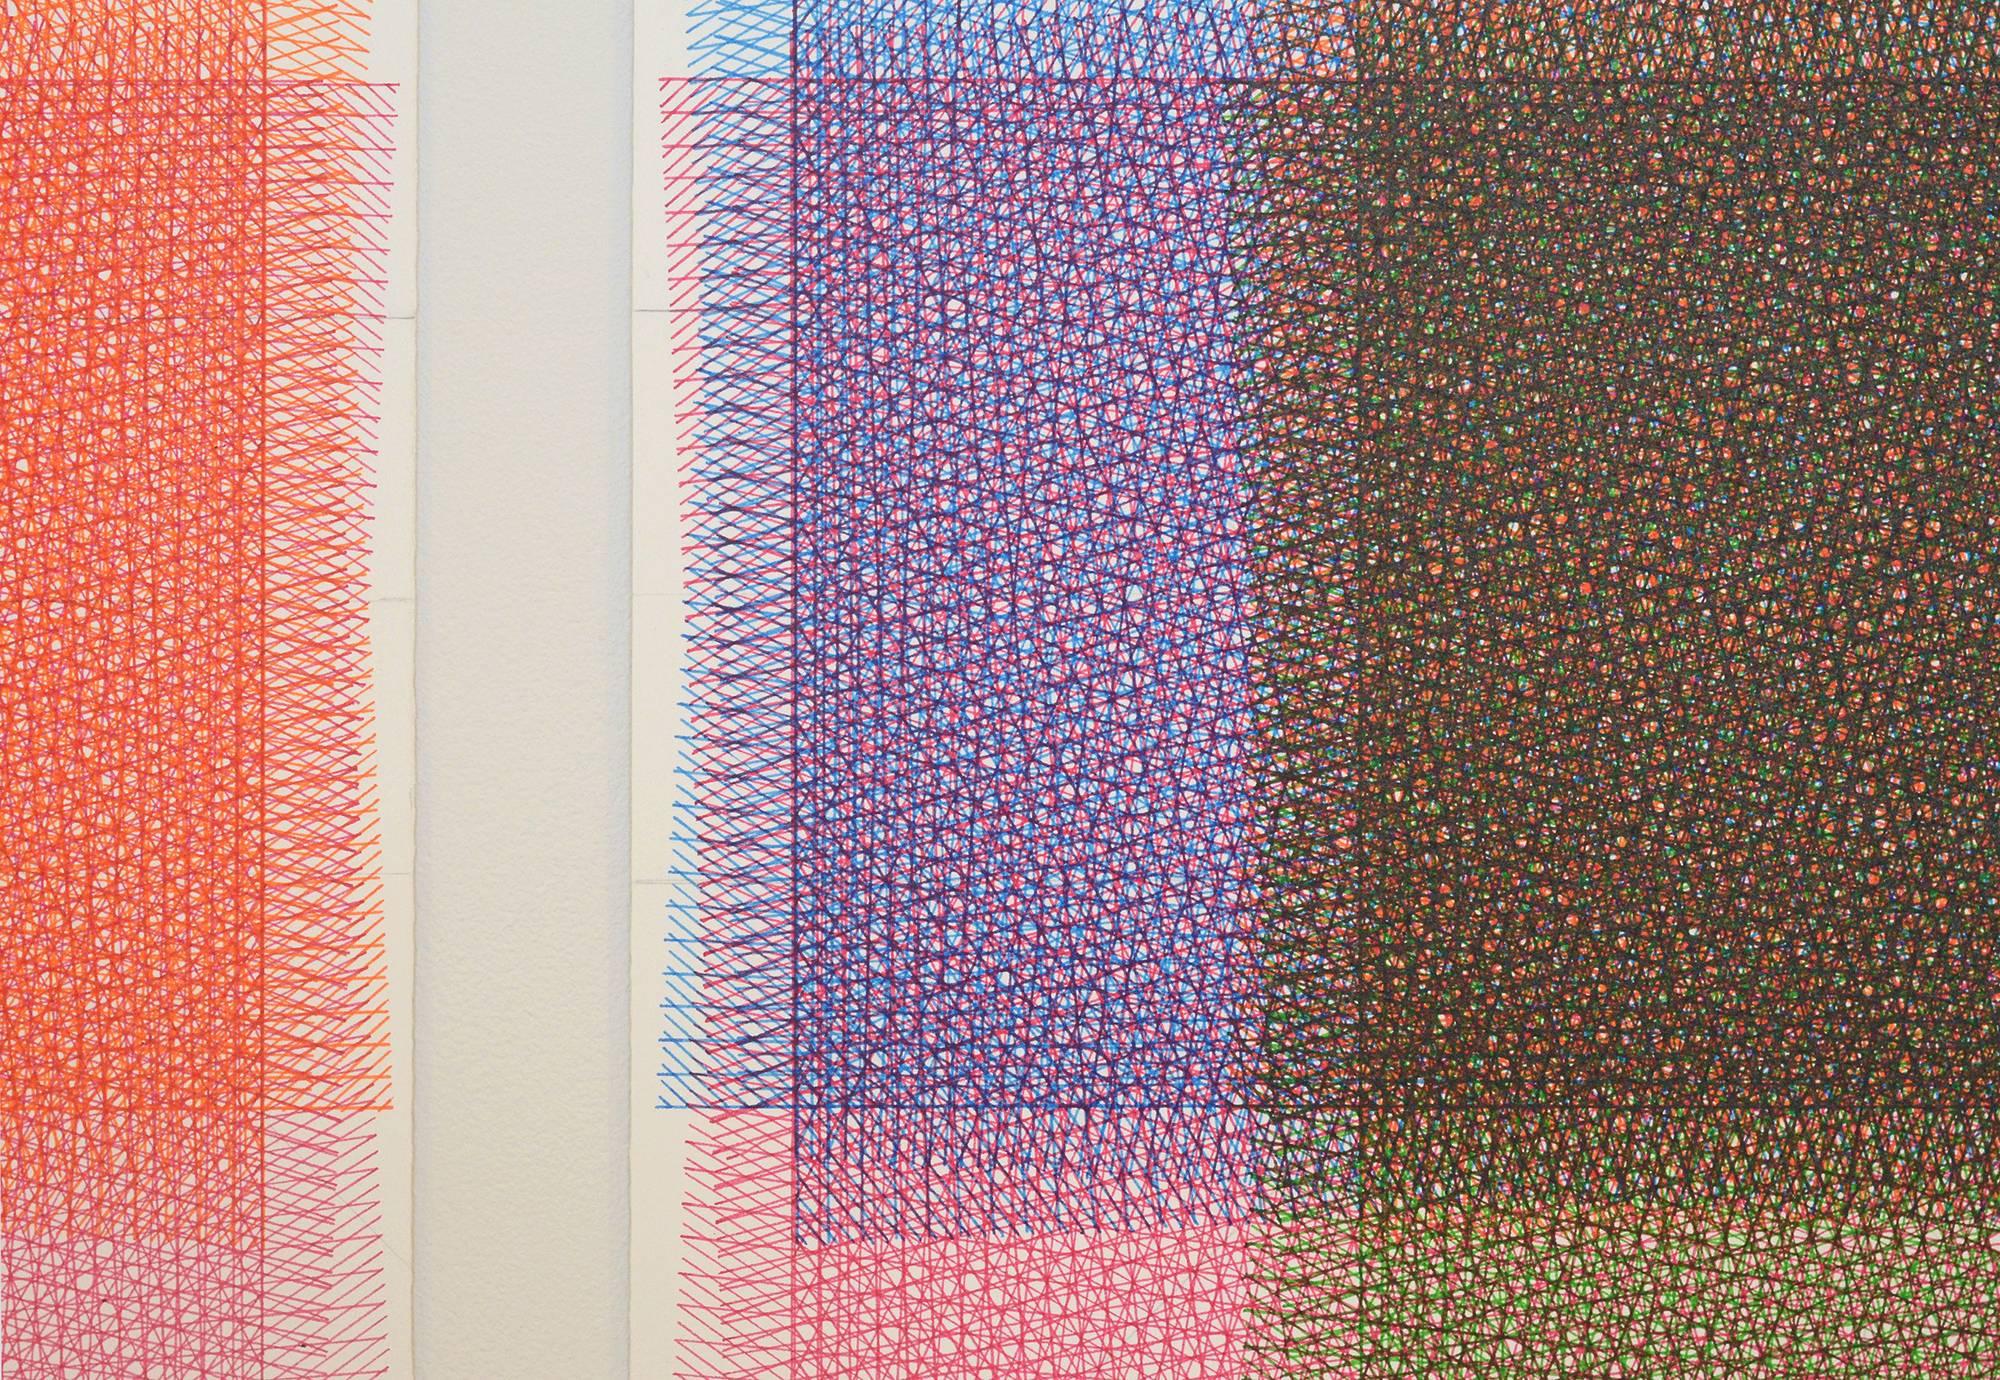 Sara Eichner, 32 Layers of Rectangles, 2016, Minimalist Abstraction, Ink For Sale 1